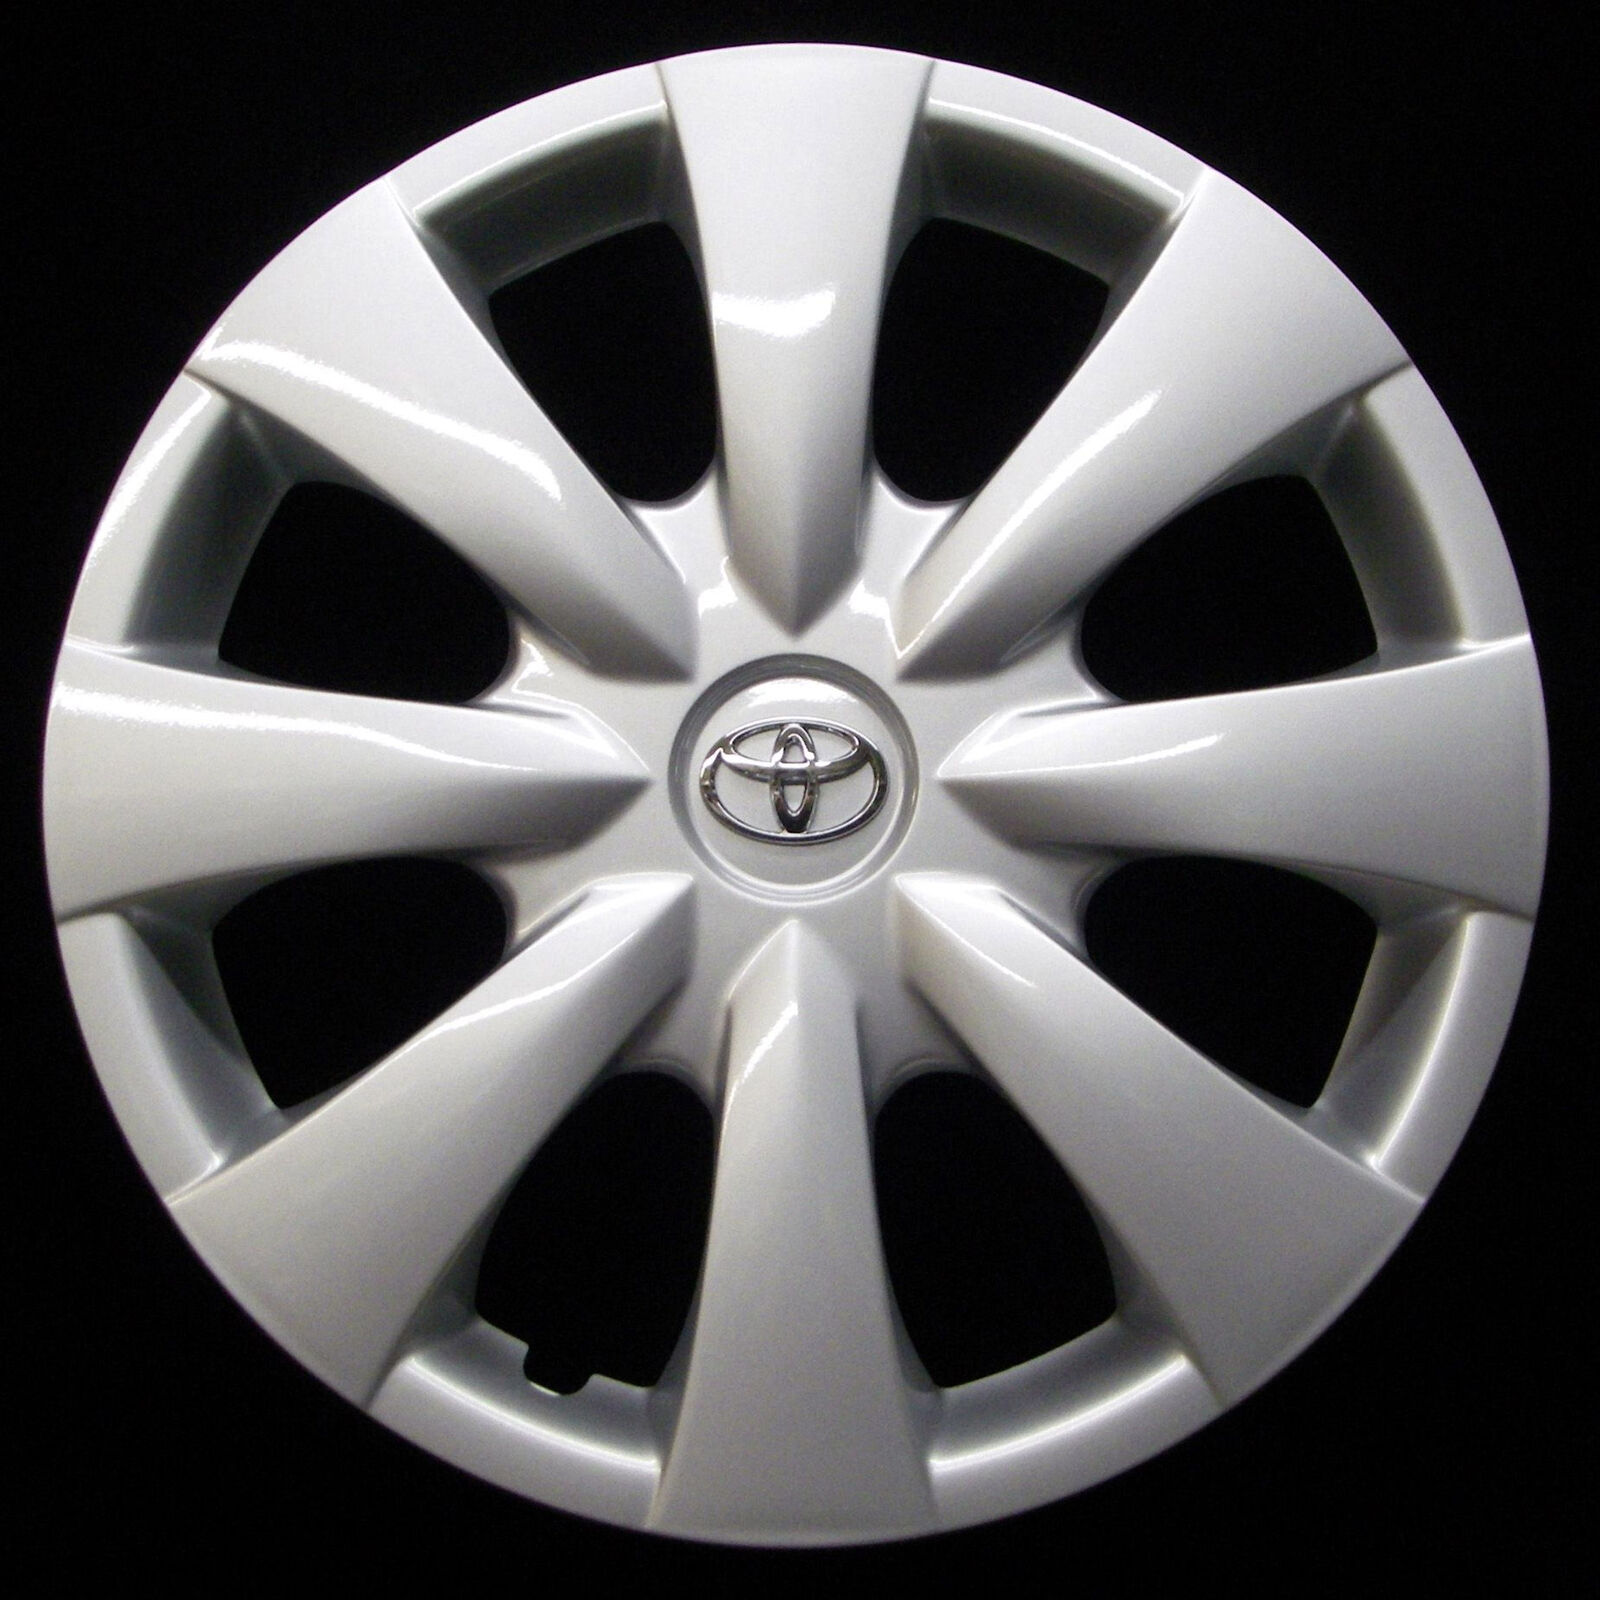 Hubcap for Toyota Corolla 2009-2013, Genuine OE Factory 15-in Wheel Cover 61147a